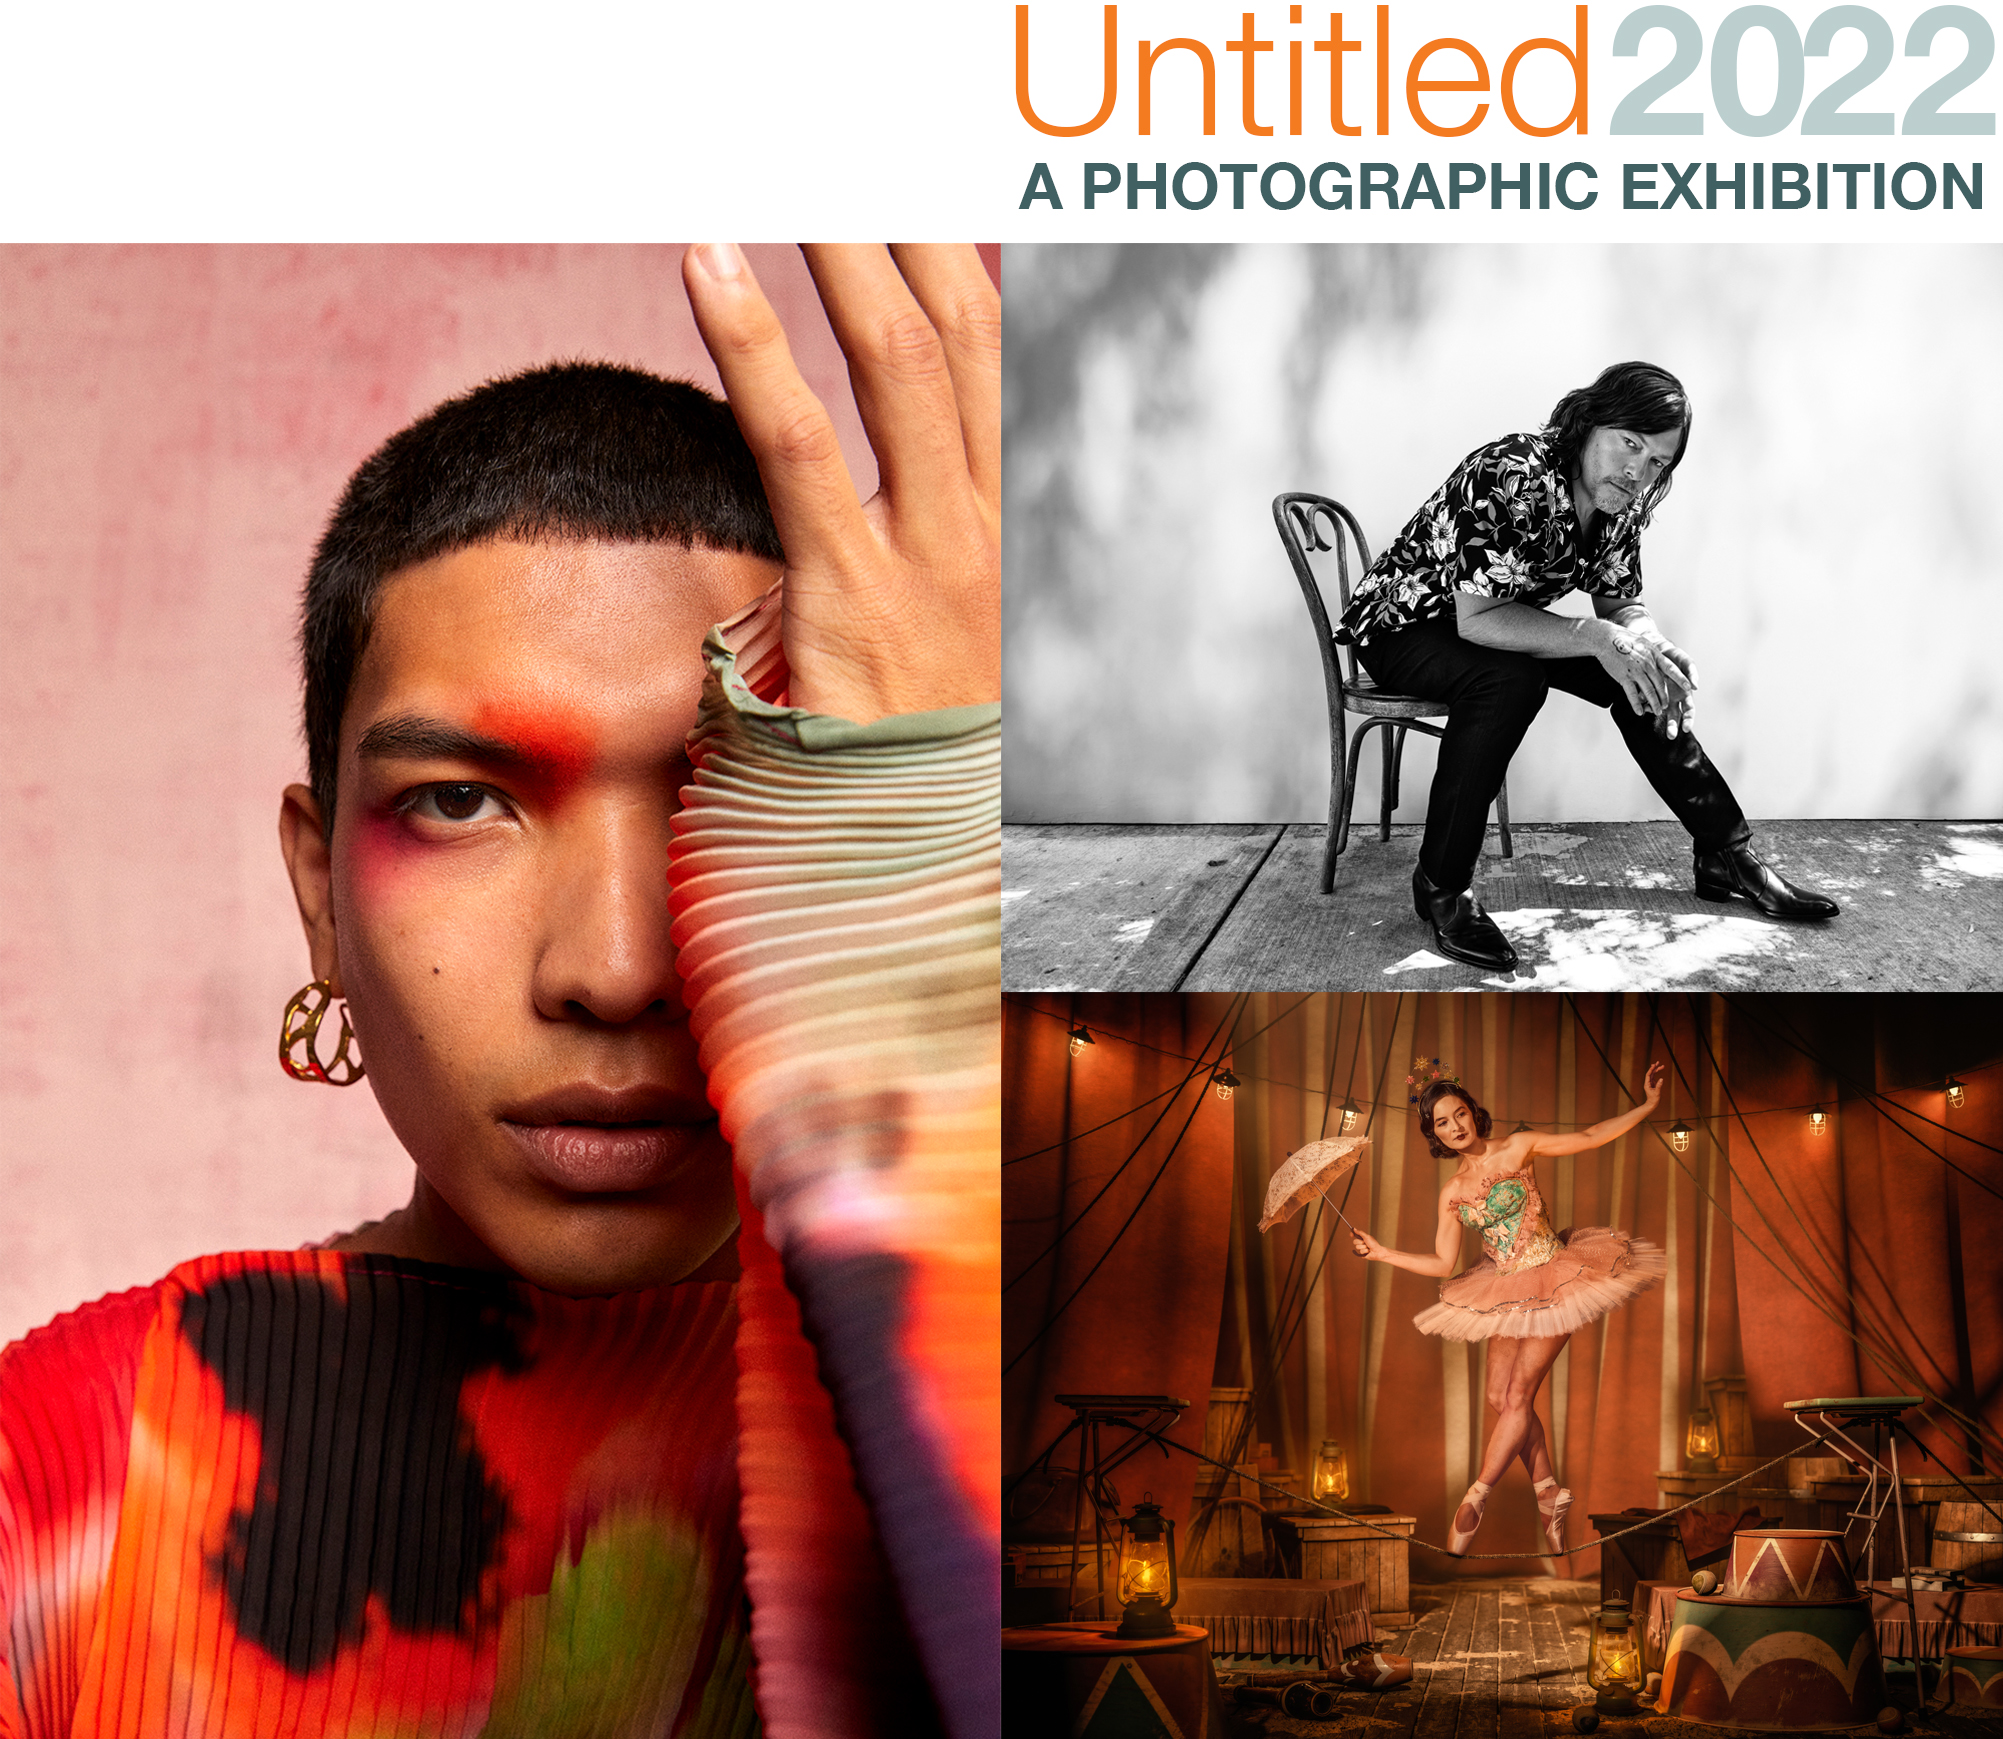 Marketing graphic for APA Untitled 2022 exhibition